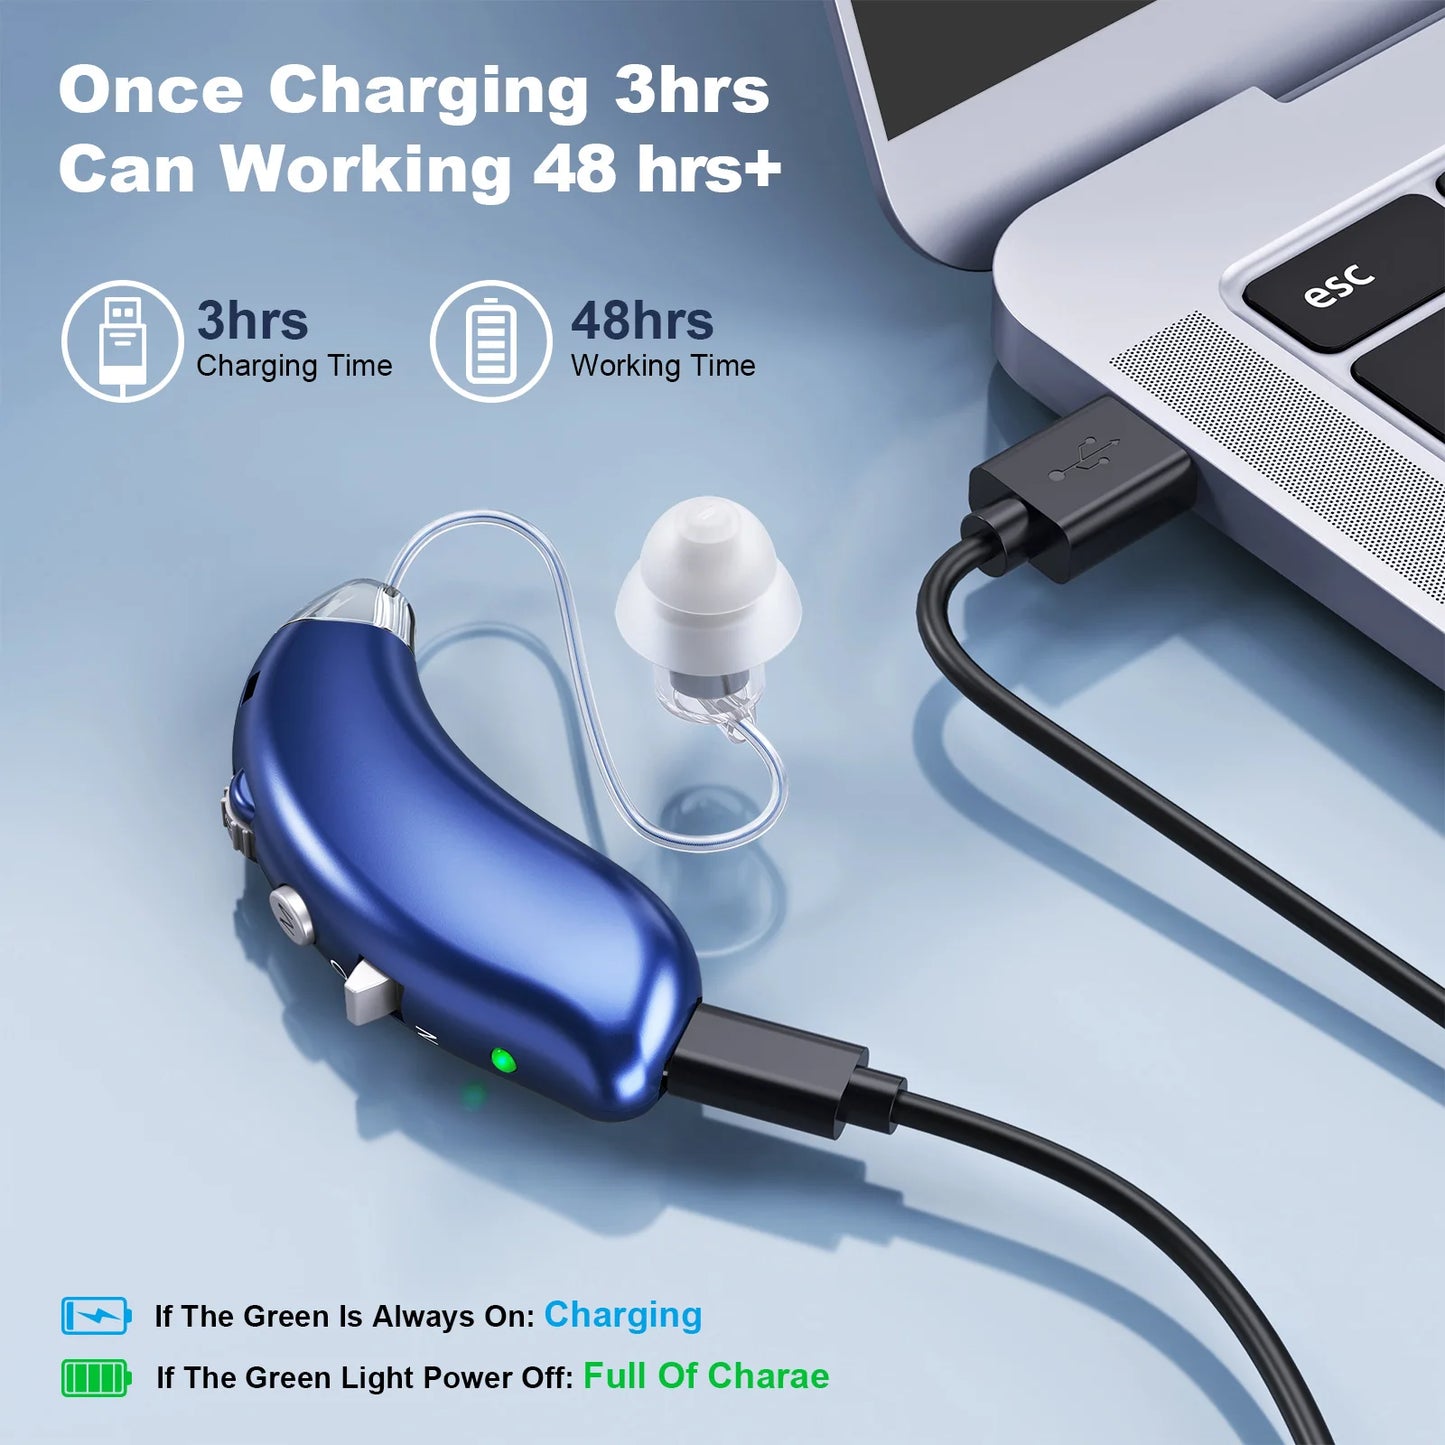 Rechargeable digital hearing aid type-c interface adjustable portable and comfortable soft silicone elderly for seniors.